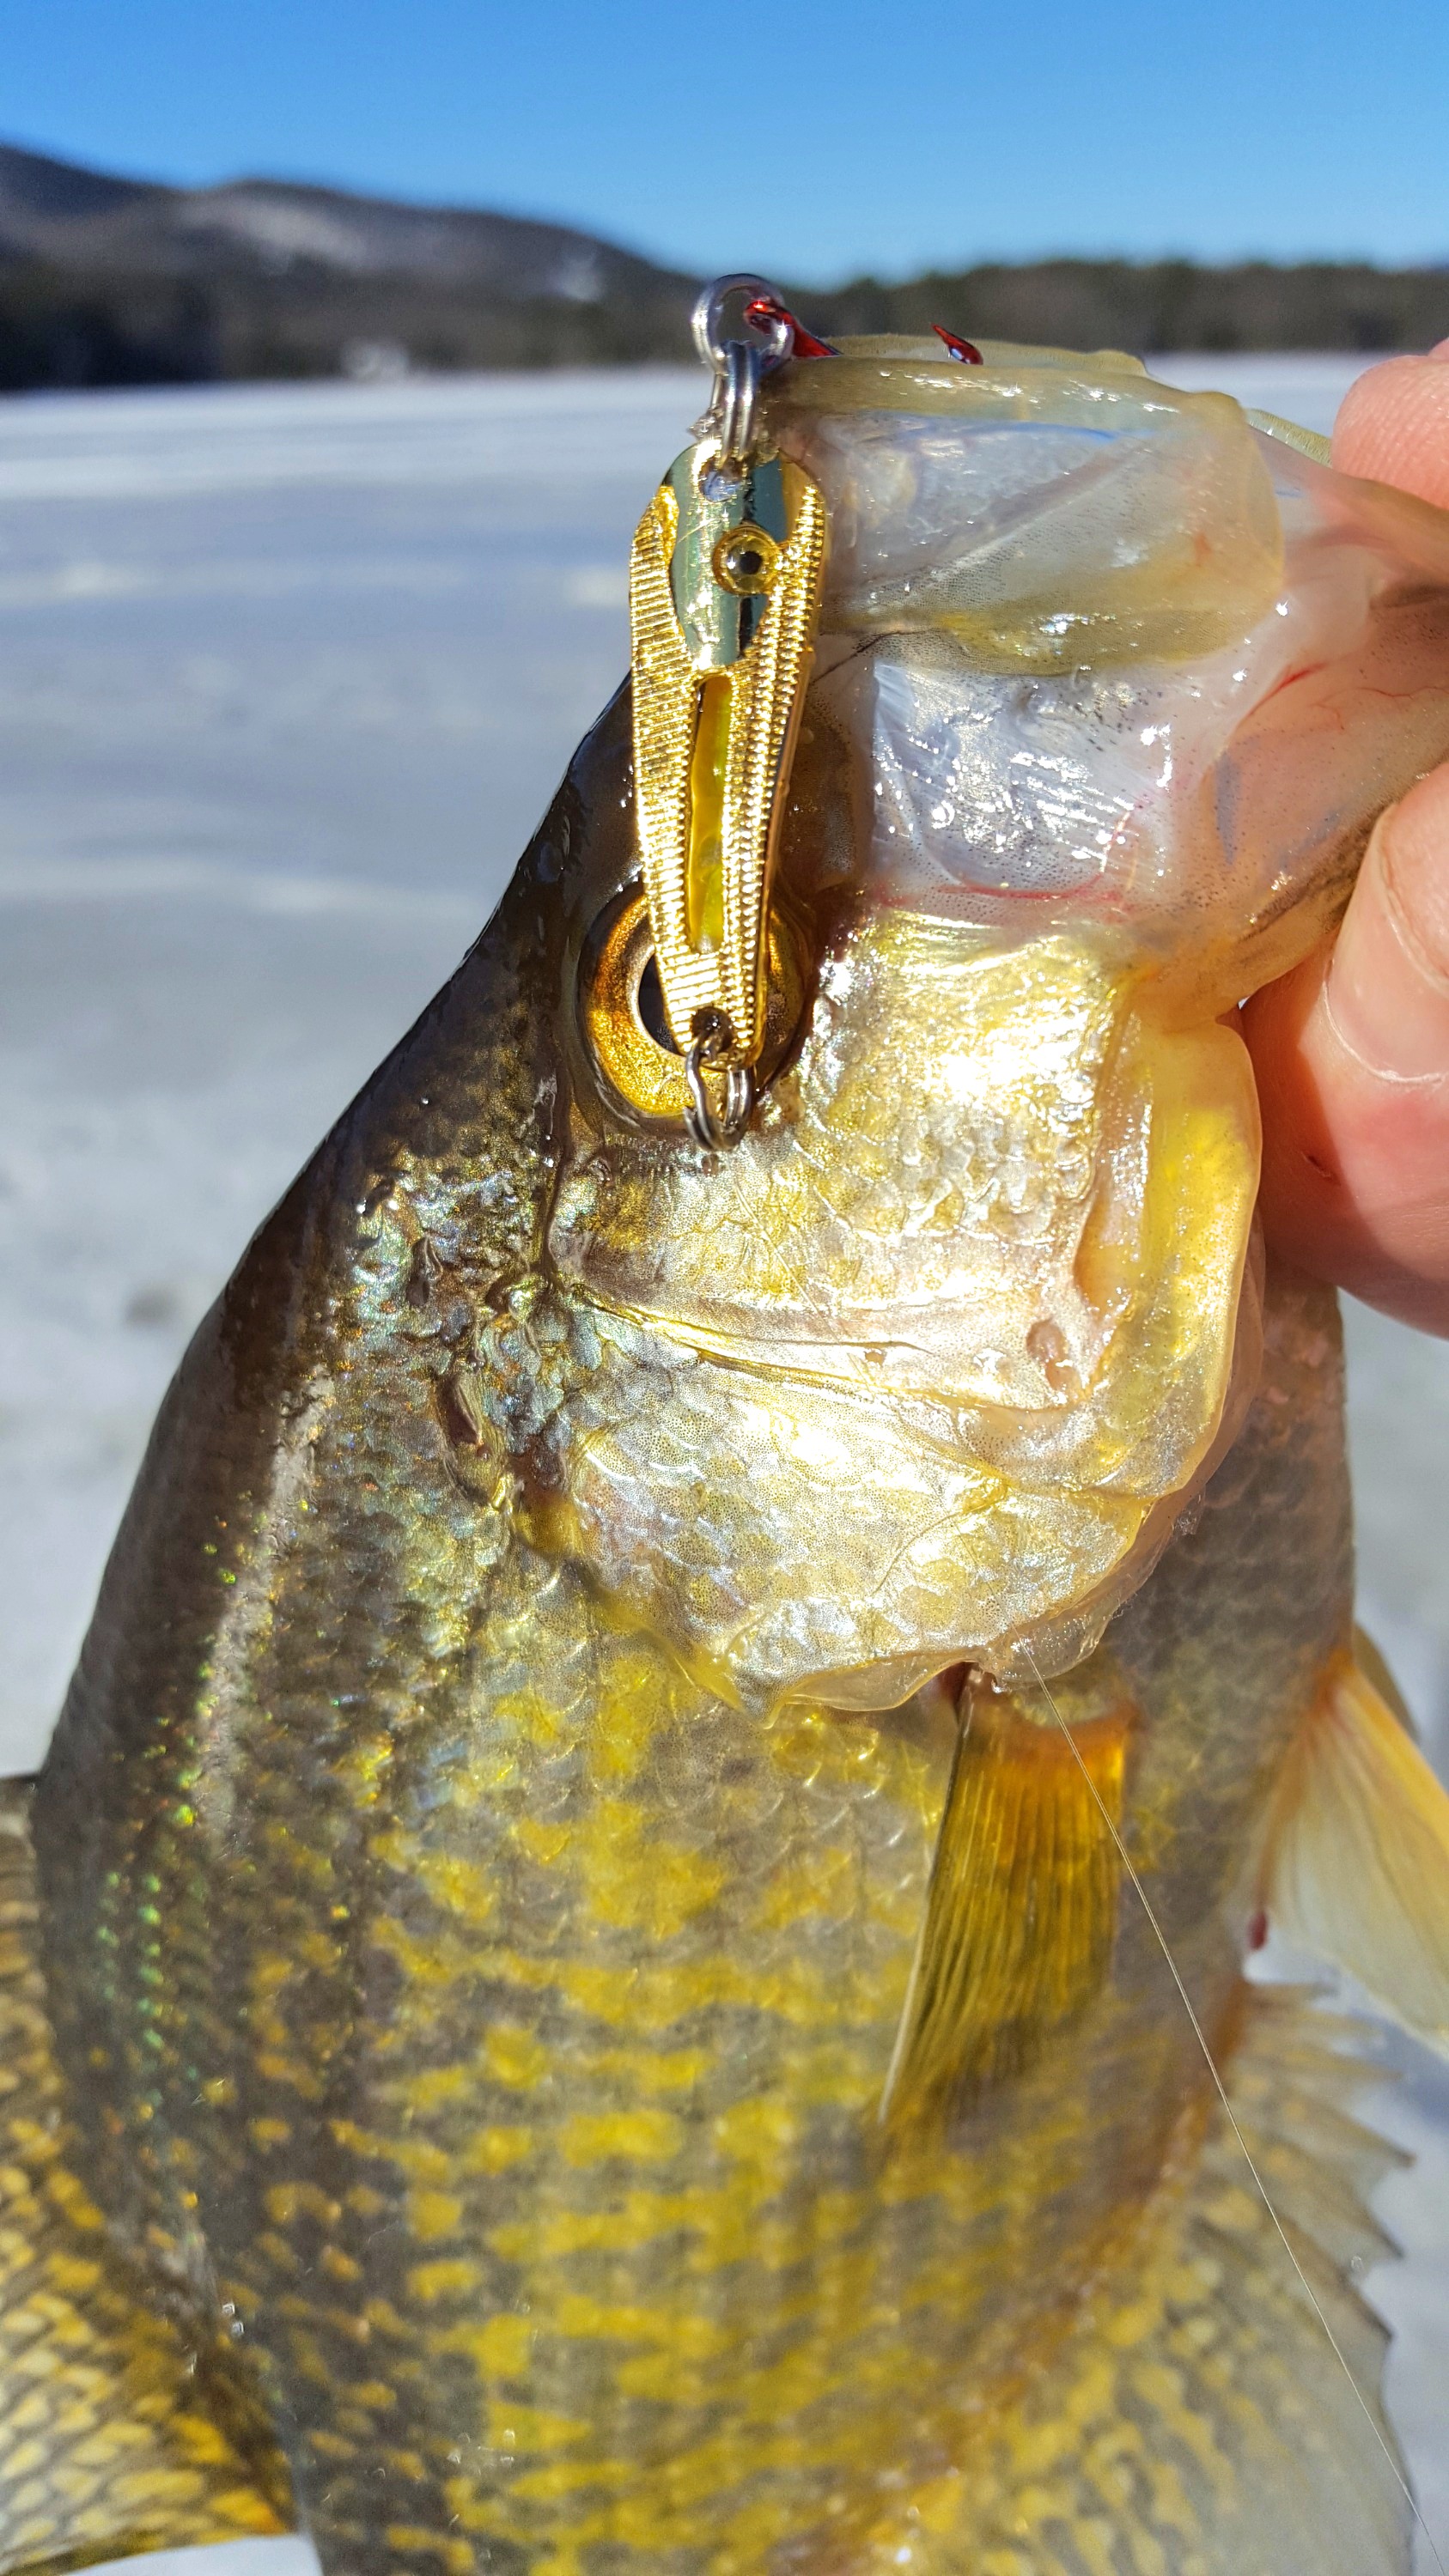 Crappie caught ice fishing on a spoon.